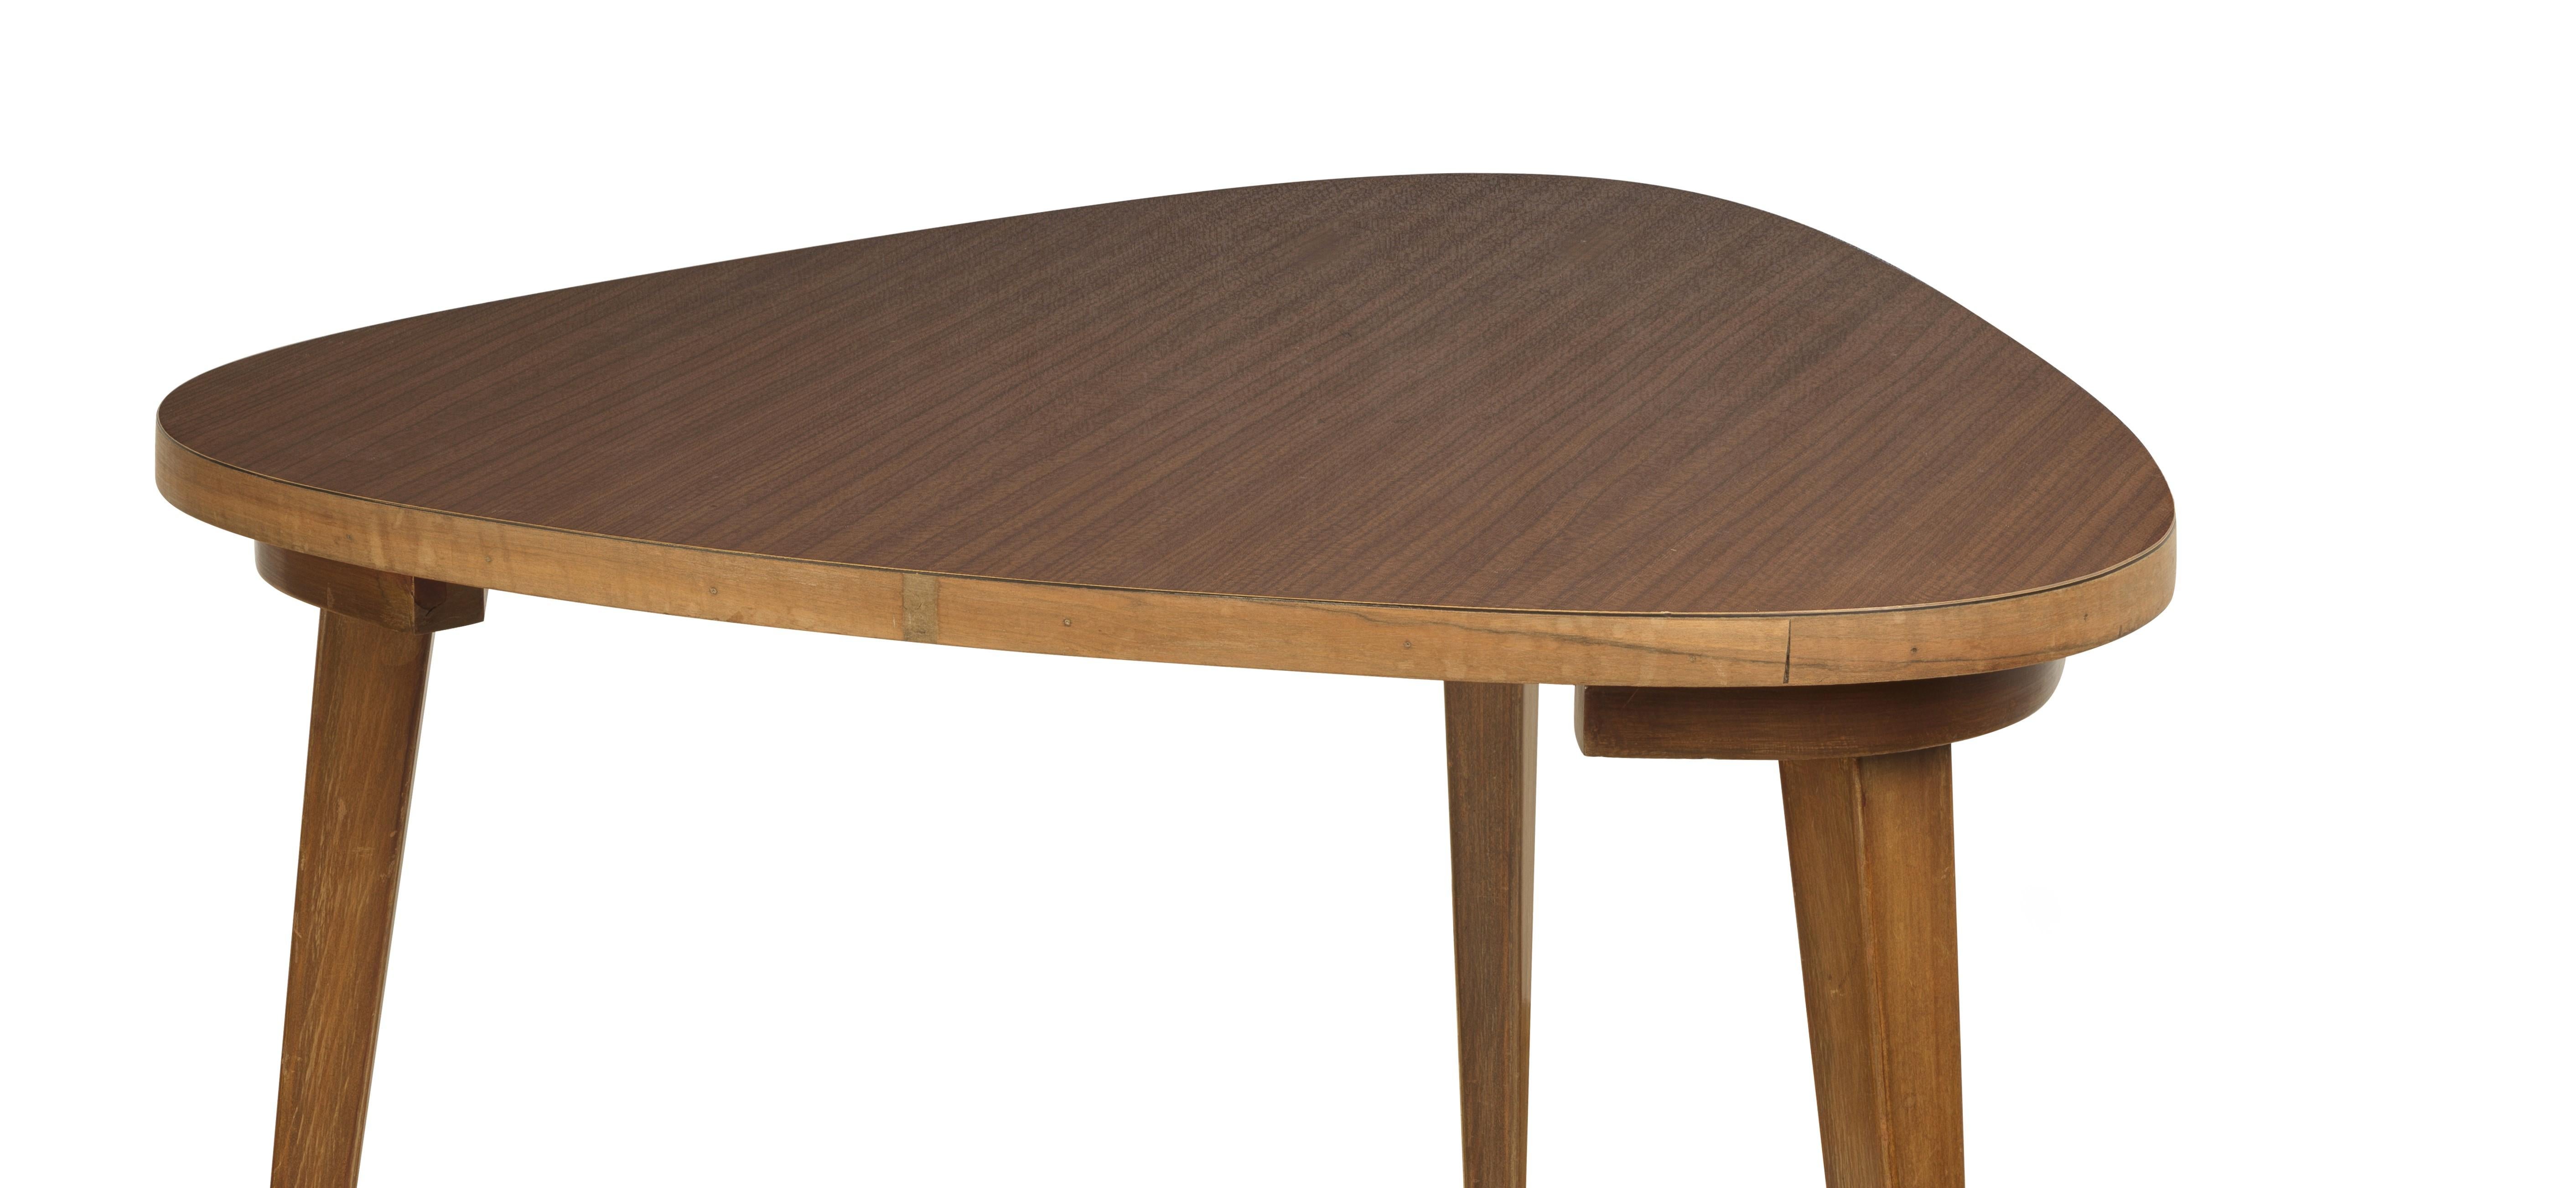  associate Danish furniture design with the country’s golden age, the mid-twentieth century. This simple, yet beautifully designed and executed side table shows why this is. This mid-century modern table combines aesthetics with modern functionality